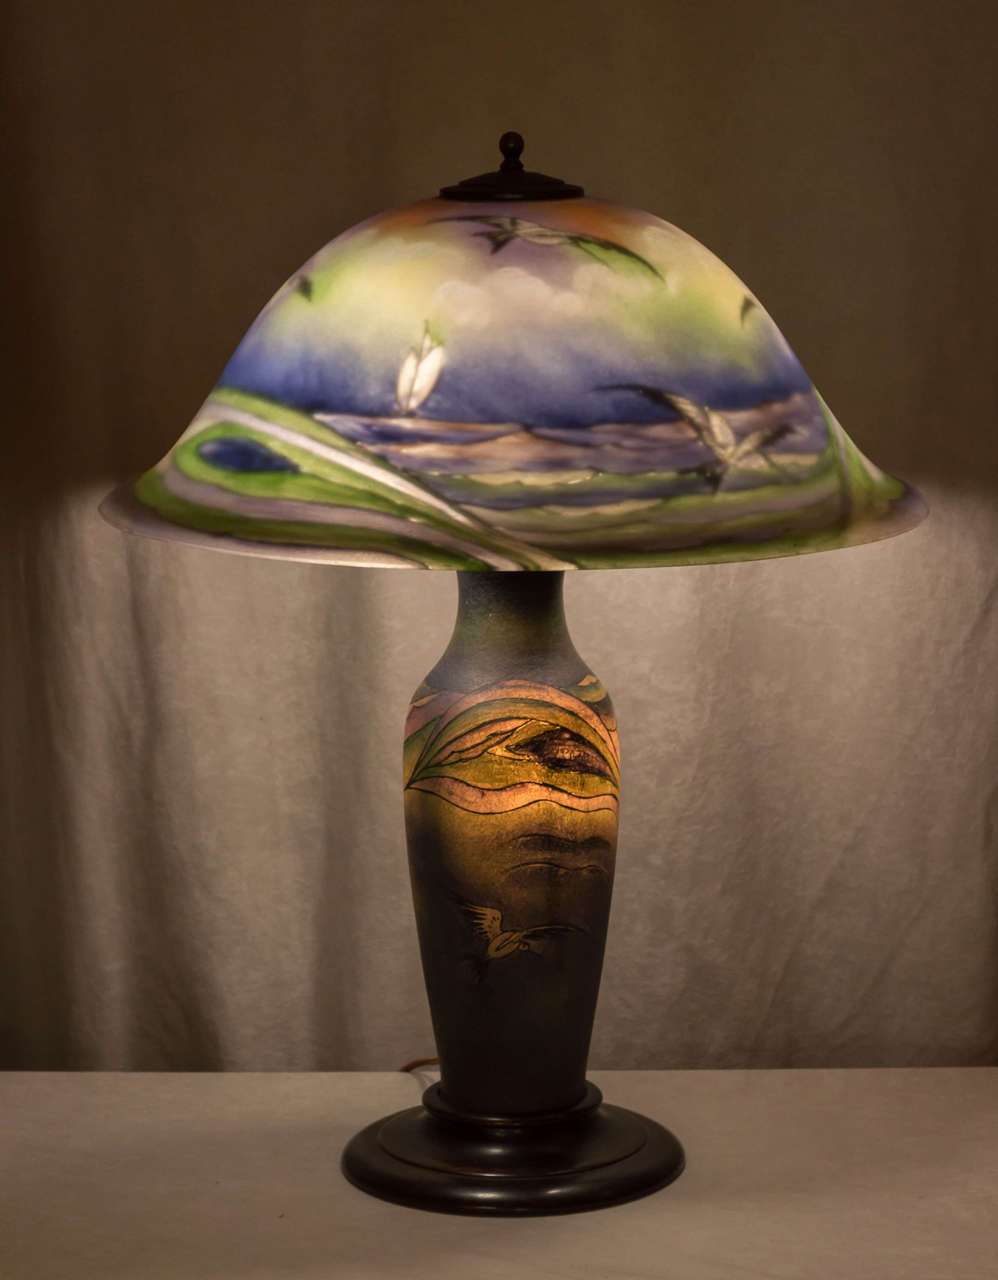 This has always been considered one of this company's more exotic and artistic lamps. Pictures do not get the full Scope of the color and presence this lamp offers. The shade is artist signed H. Fisher and there is a small paper remnant of the